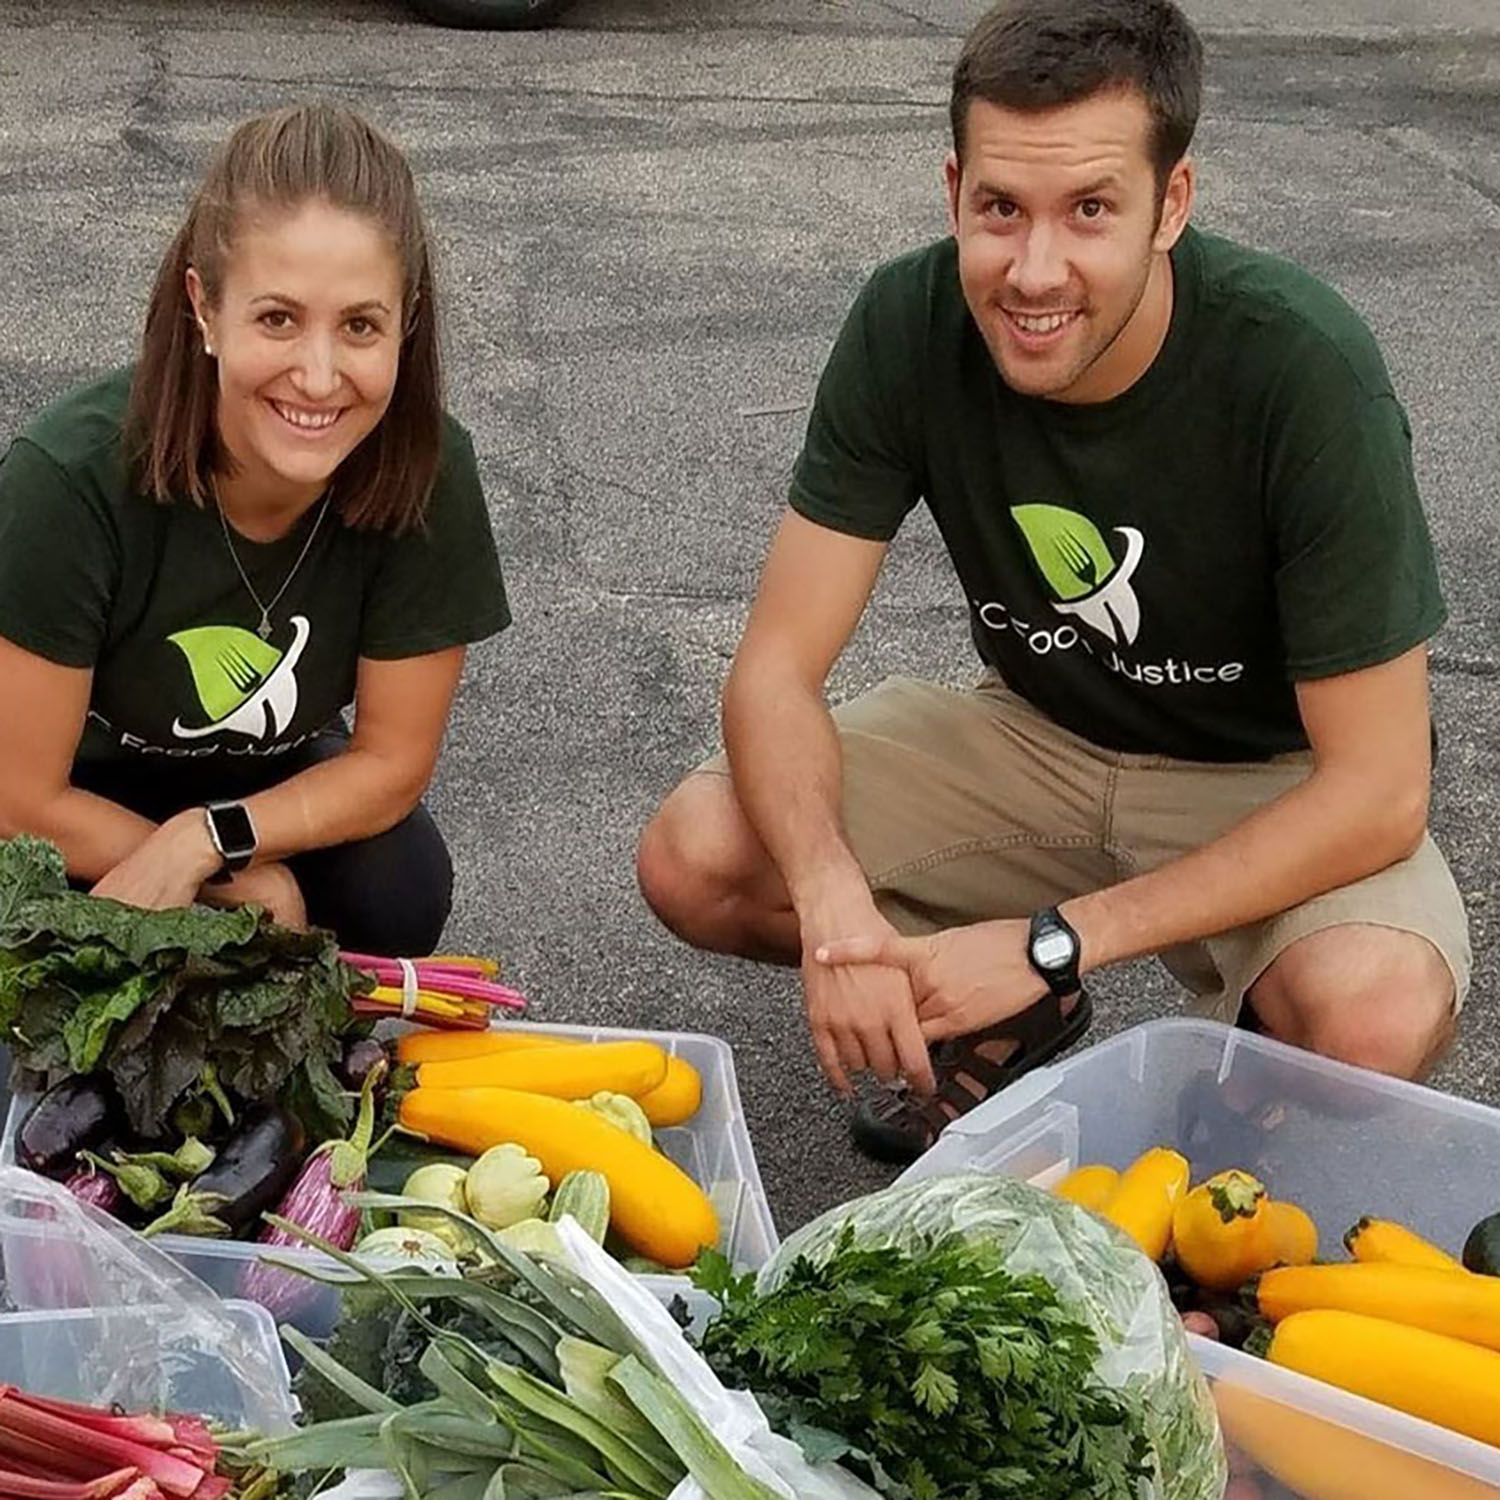 two people smiling behind large containers of produce